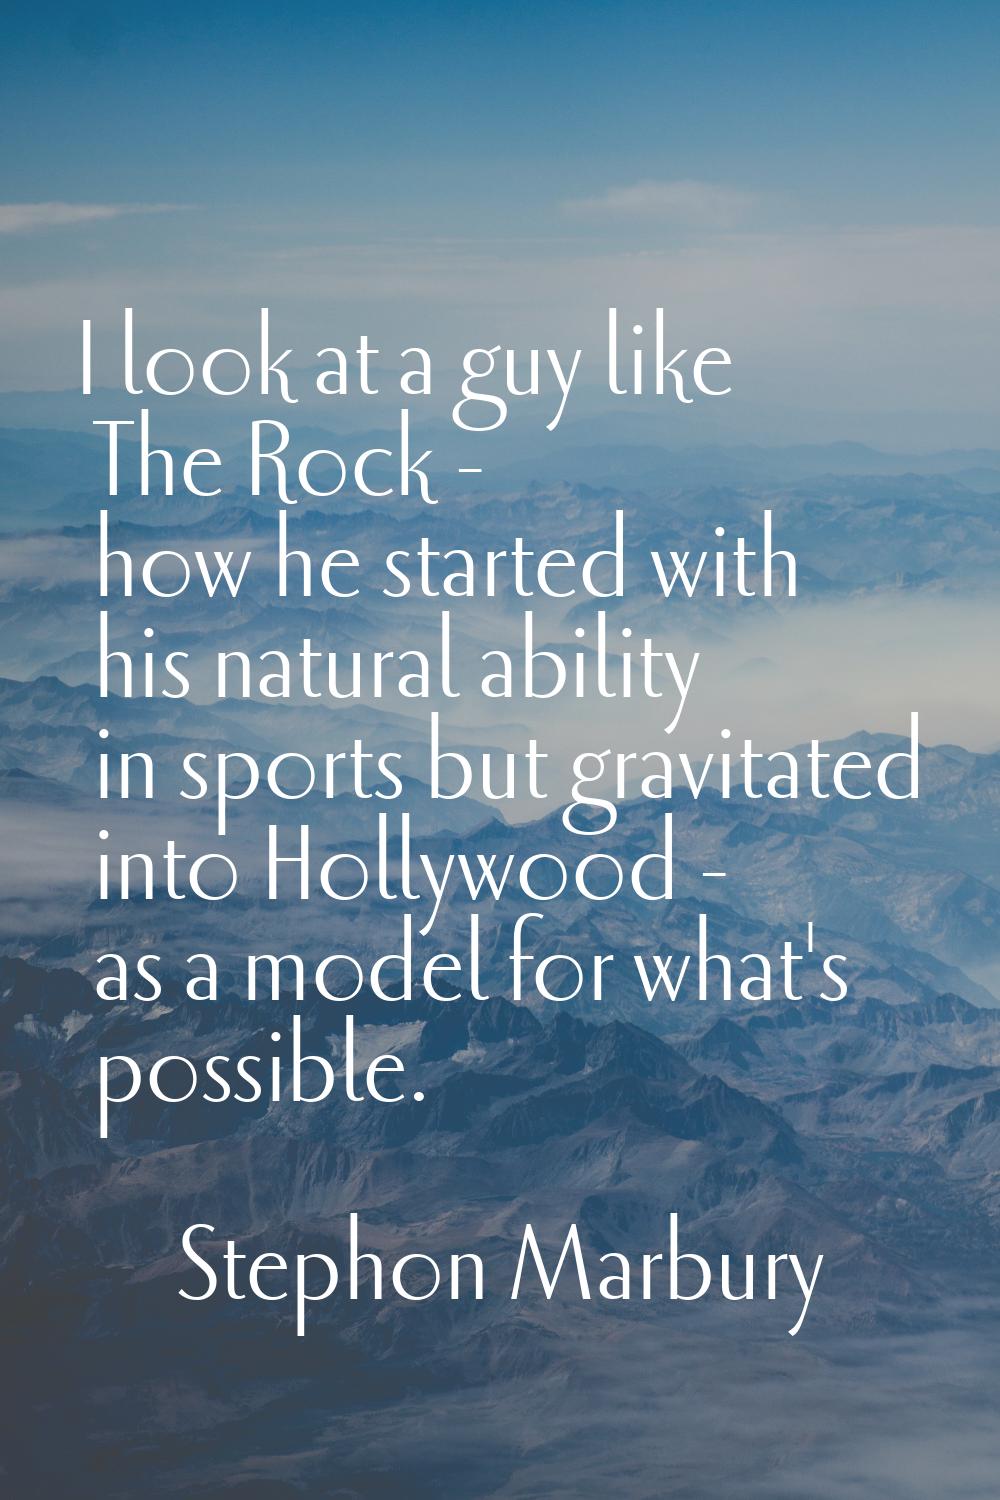 I look at a guy like The Rock - how he started with his natural ability in sports but gravitated in